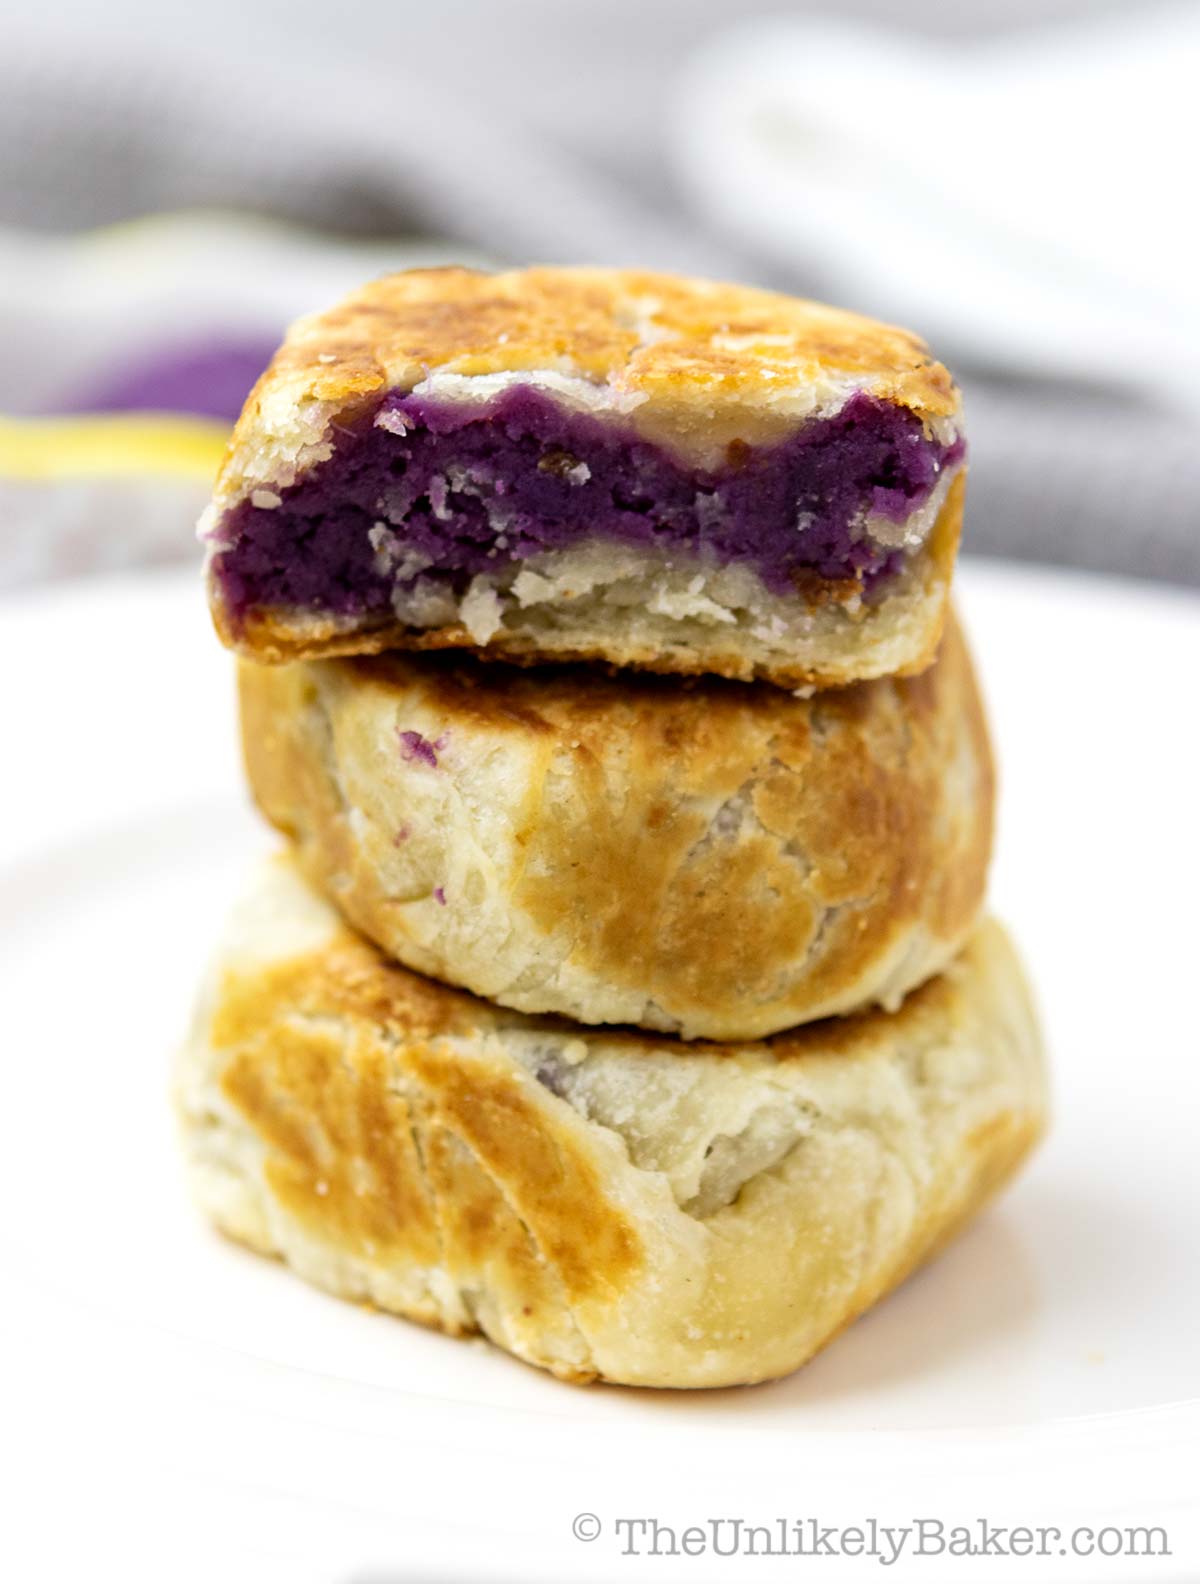 A stack of hopiang ube on a plate.